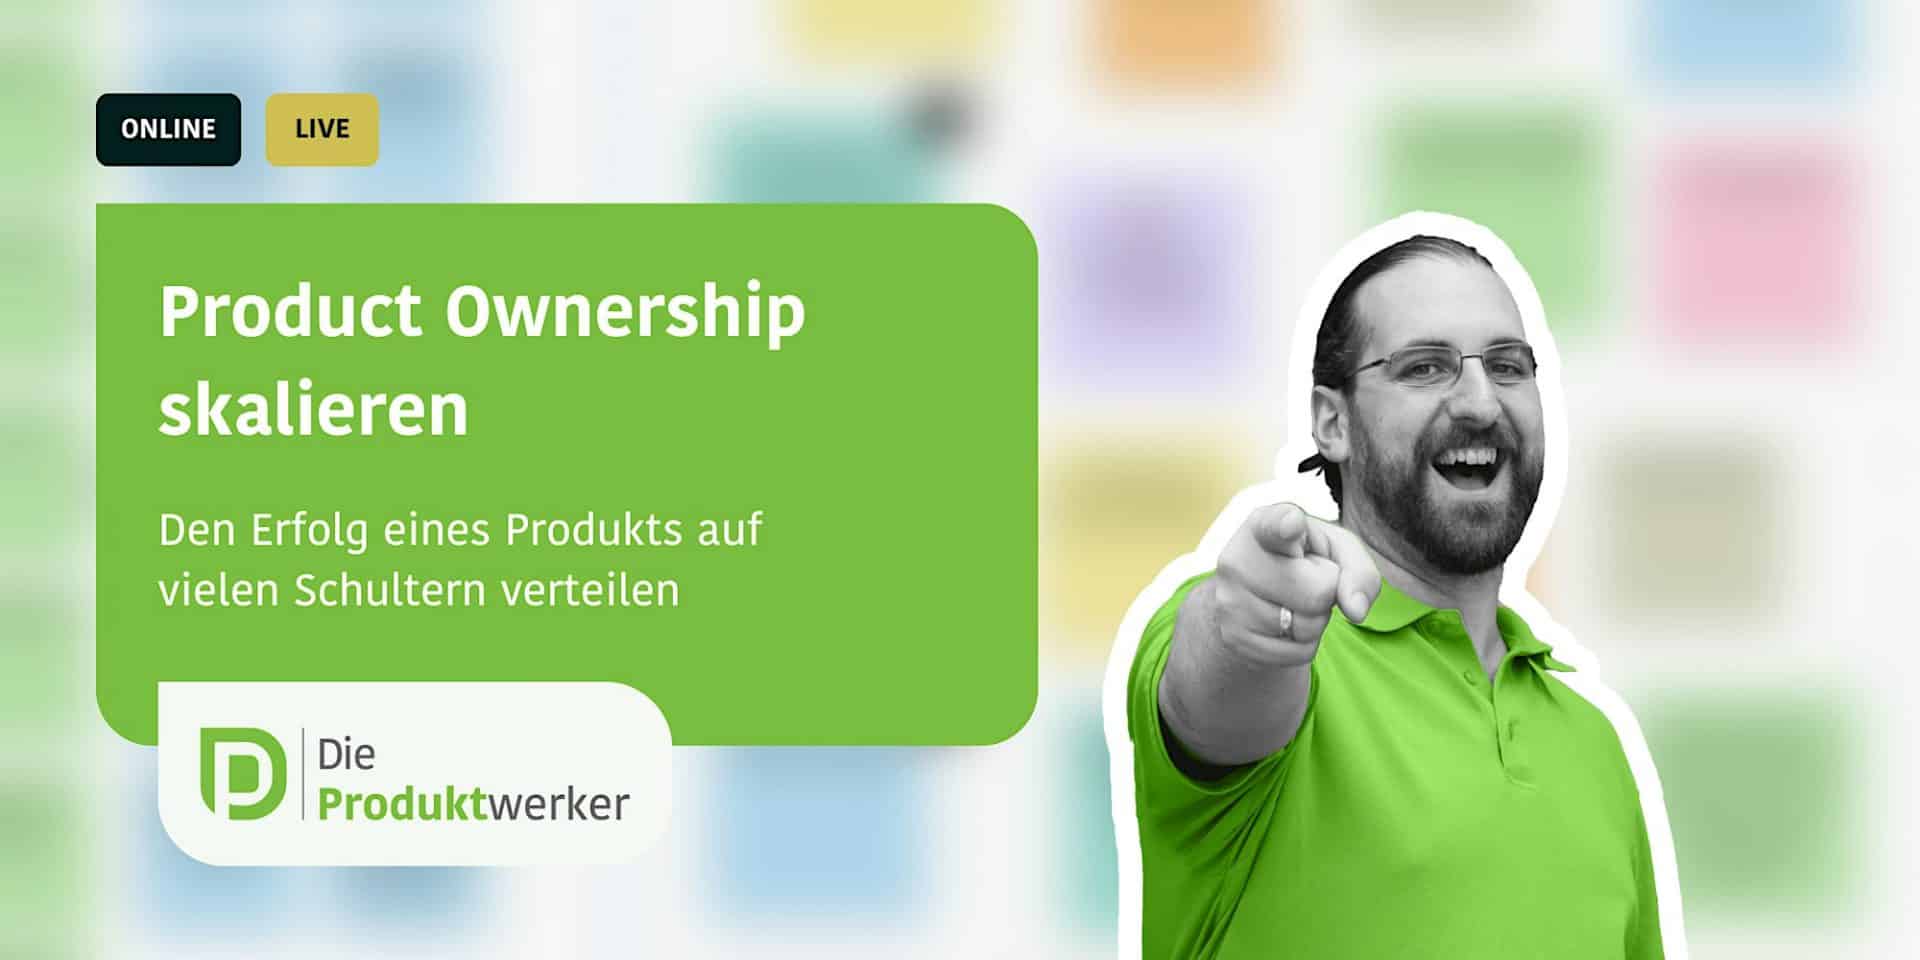 Product Ownership skalieren - Live Event